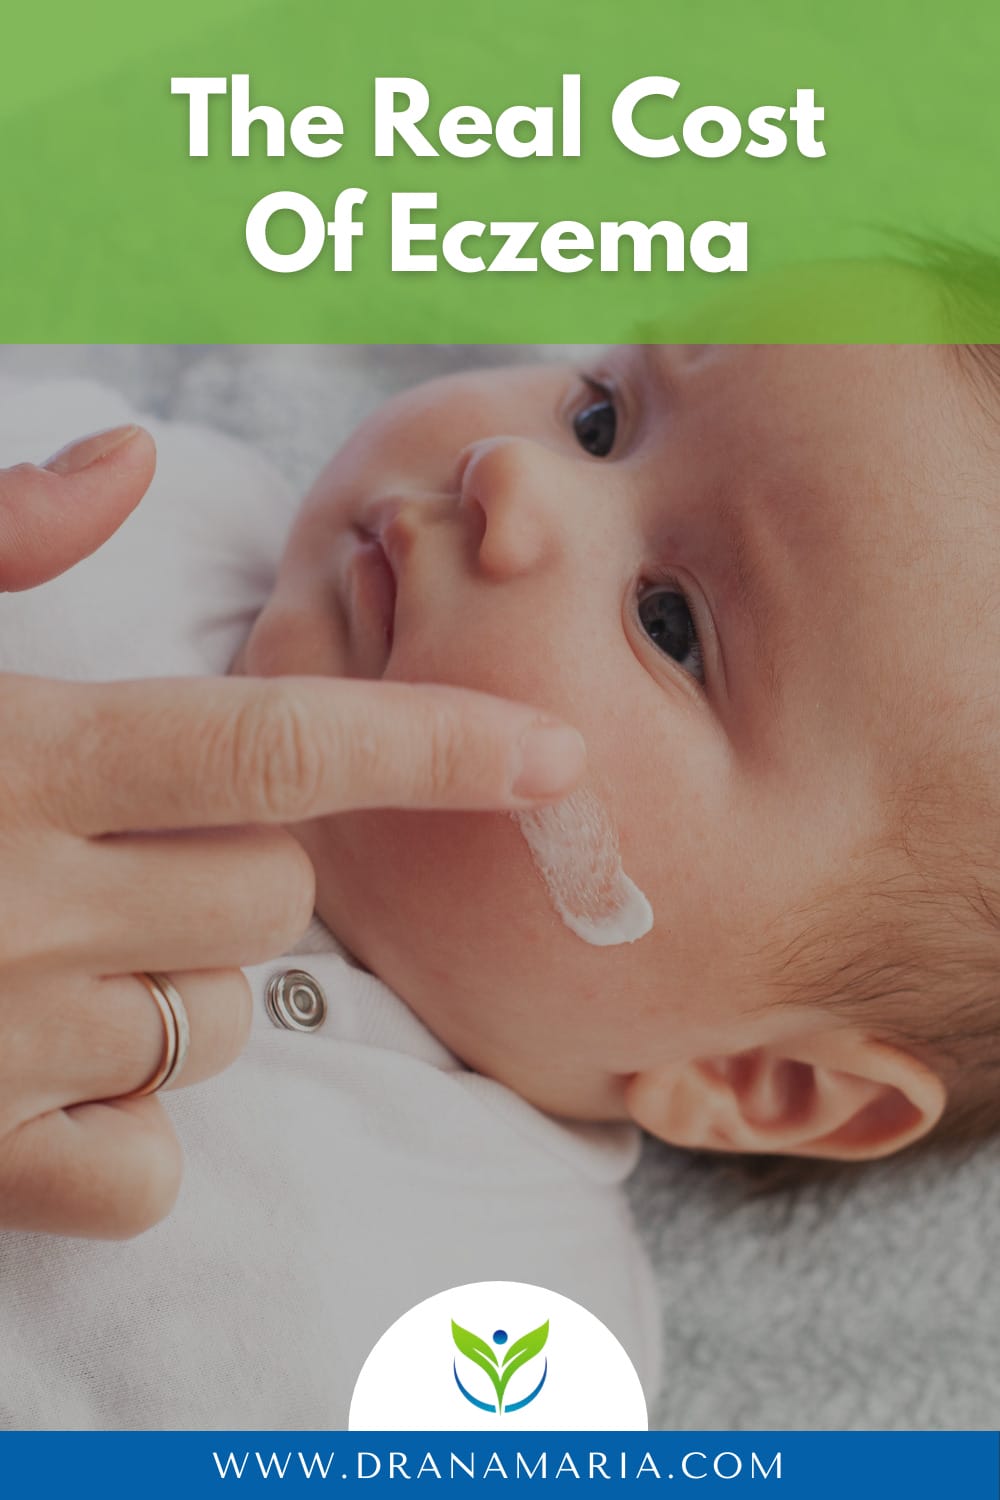 The Real Cost Of Eczema